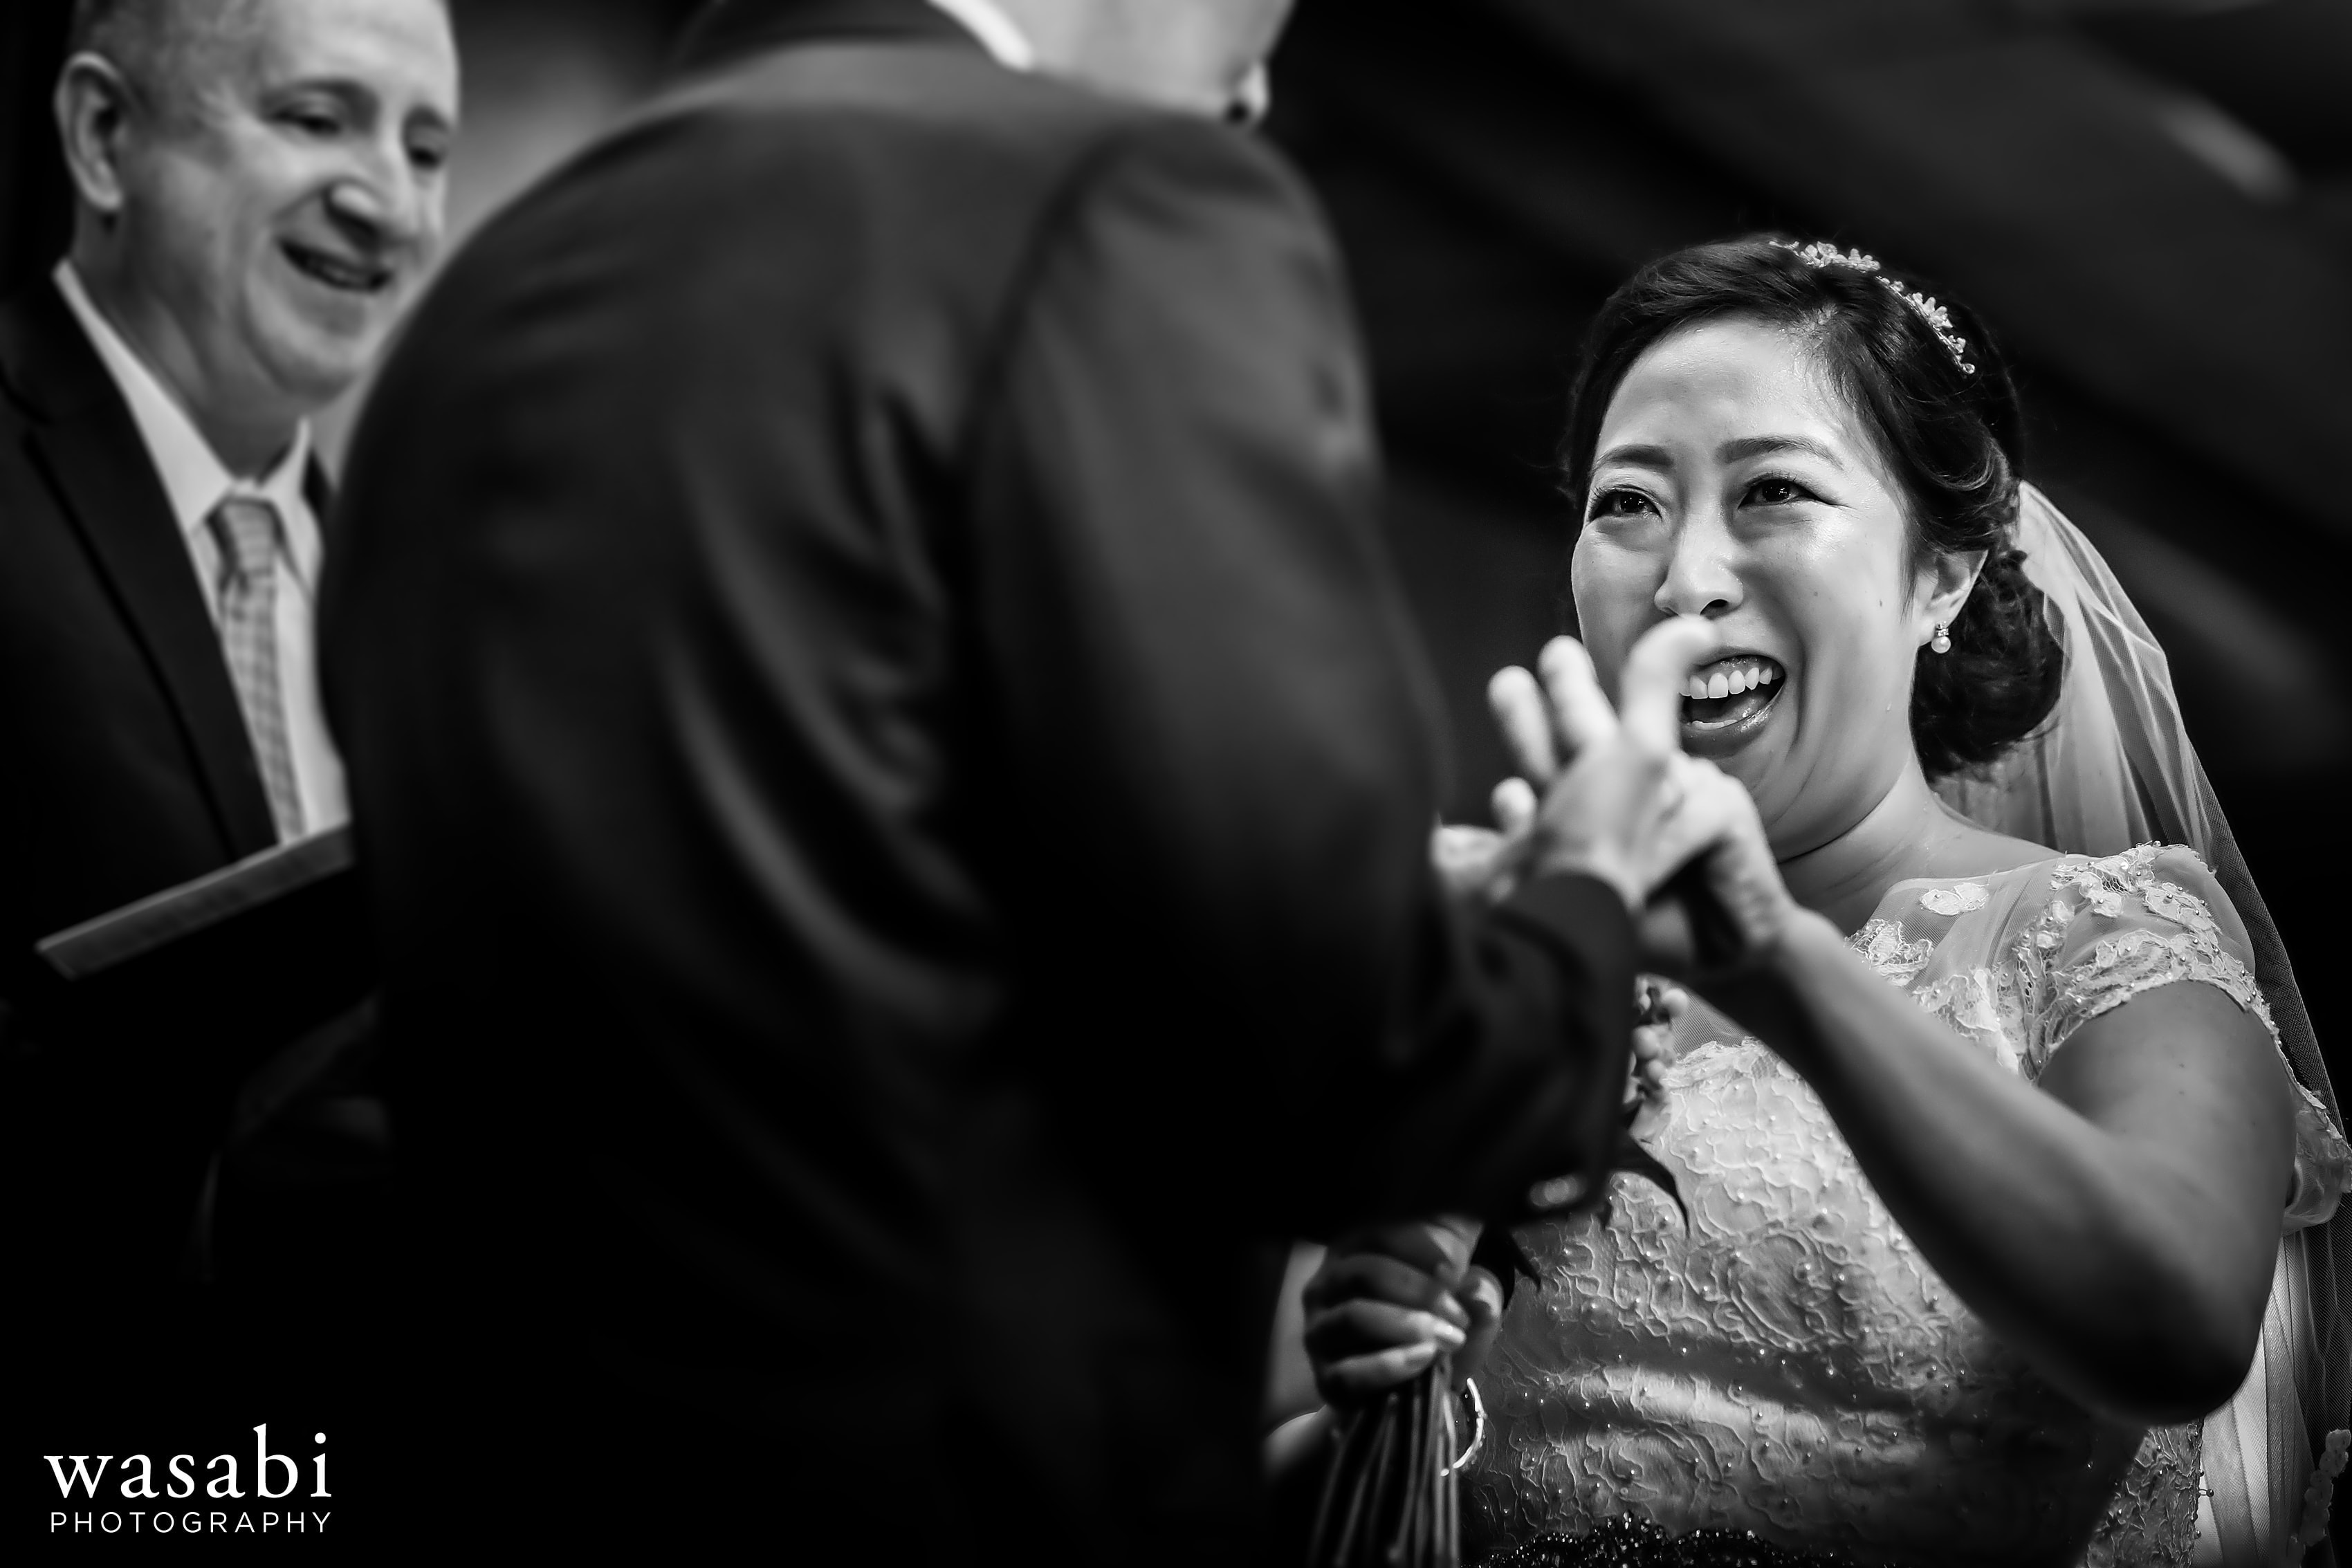 A look back at Wasabi Photography and Travis Haughton's best Chicago wedding photos of 2018, favorite moments and award winning photos. 